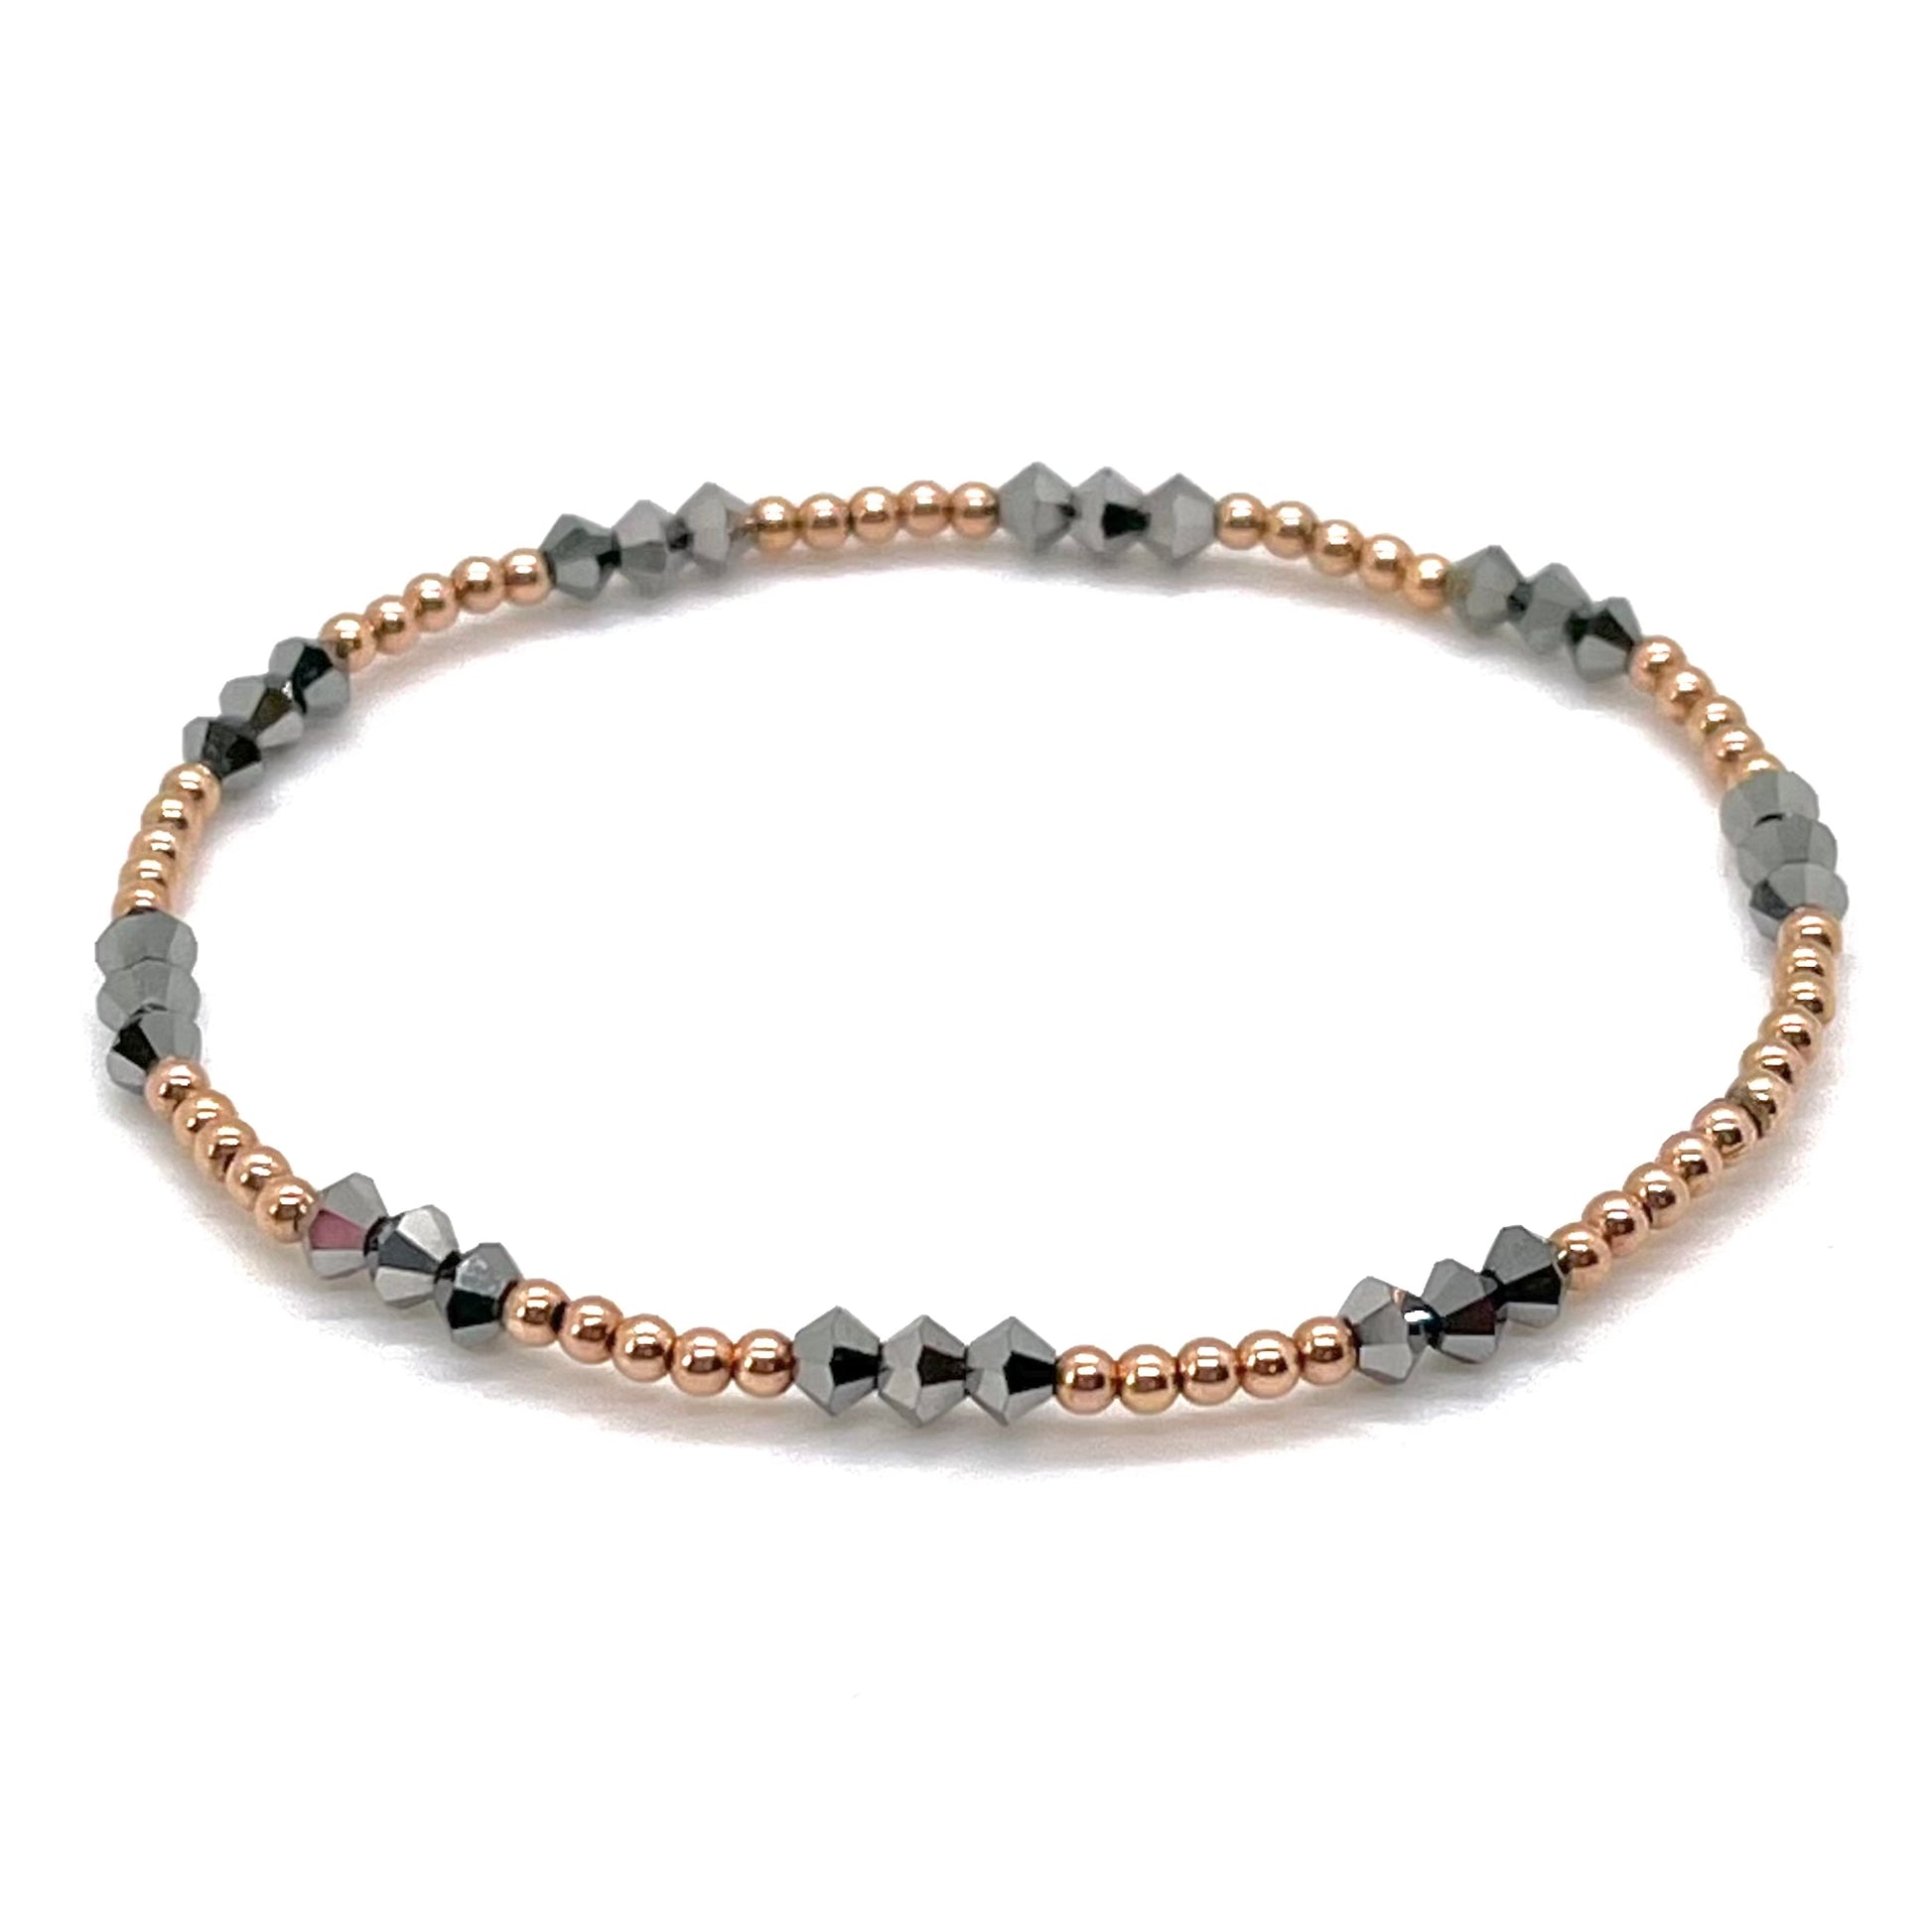 Rose gold bead bracelet with 2mm 14K gold filled balls and cyrstal hematite beads on elastic stretch.